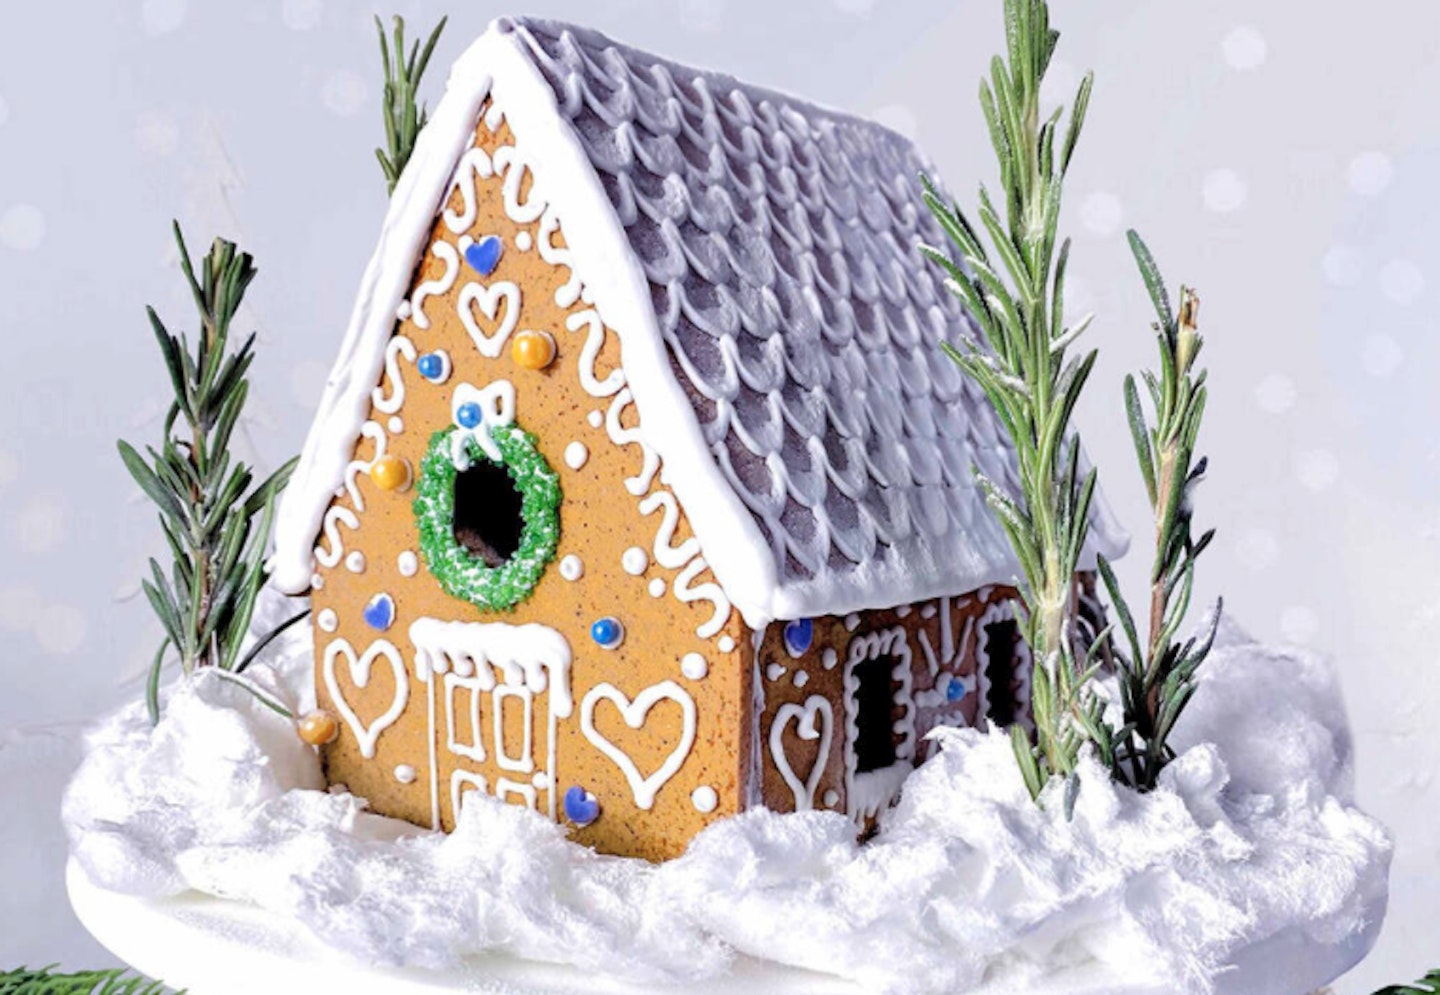 Baked By Steph Diy Gingerbread House Kit